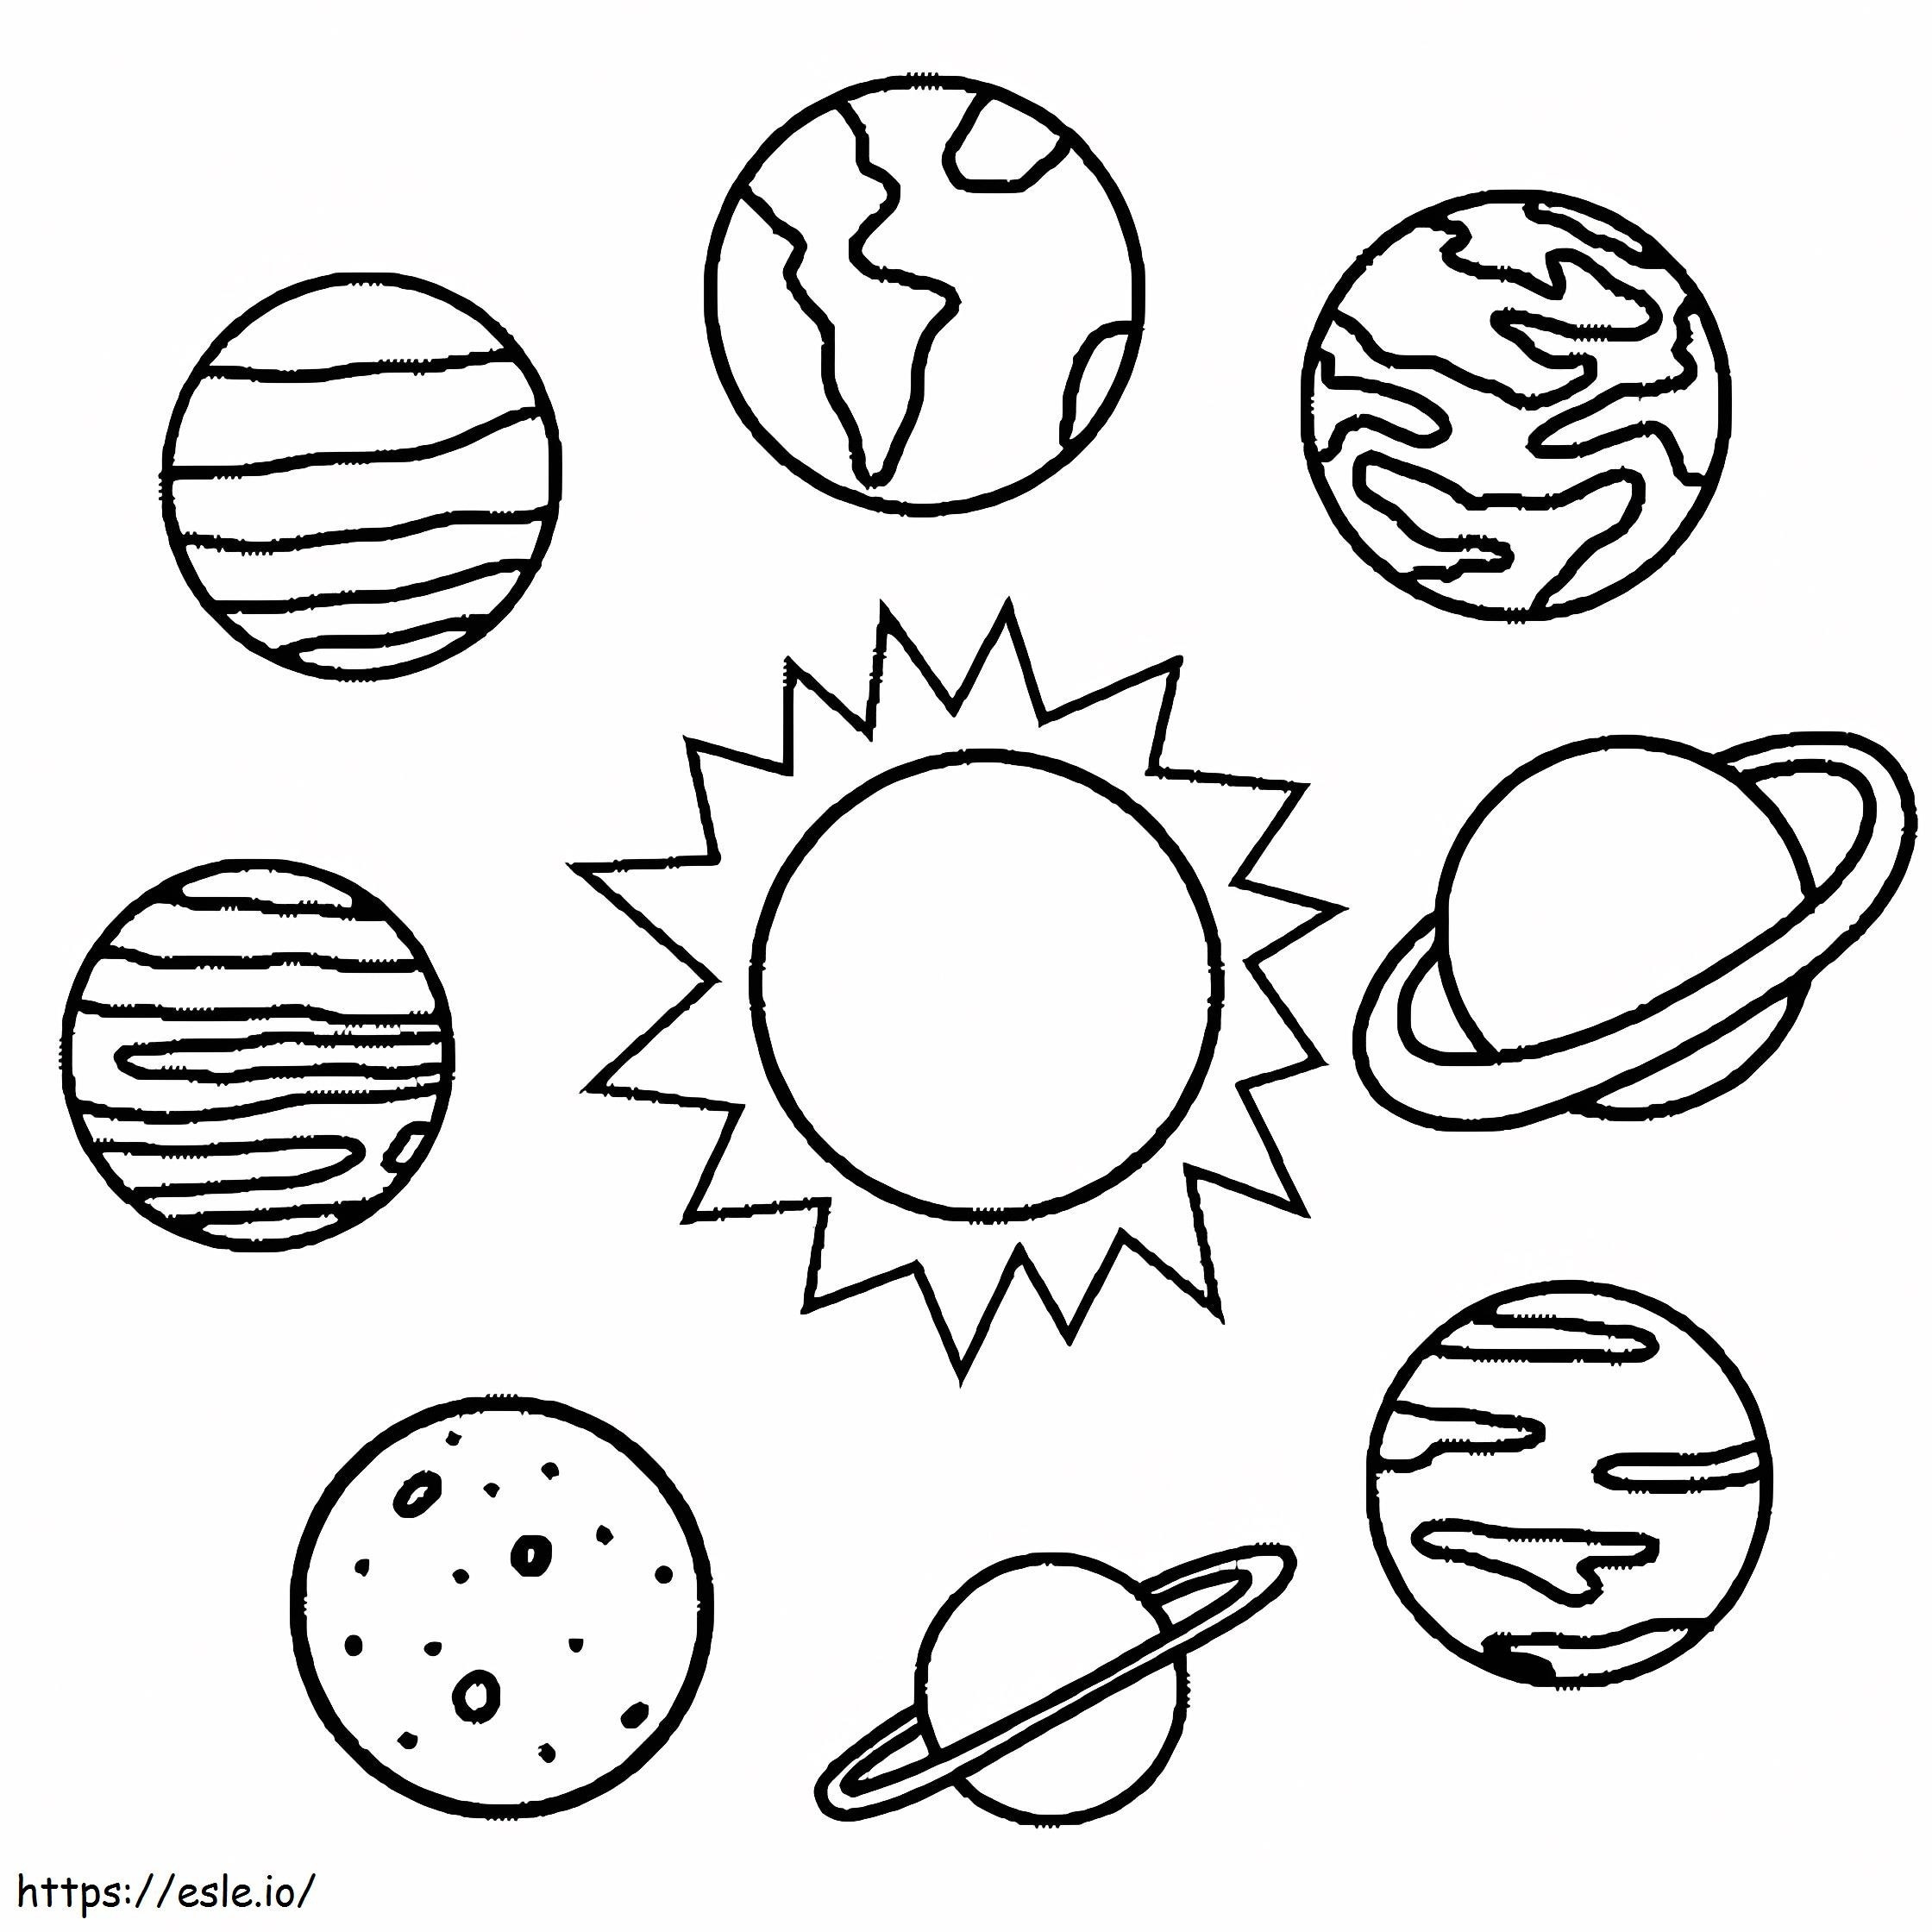 Planets Online coloring page